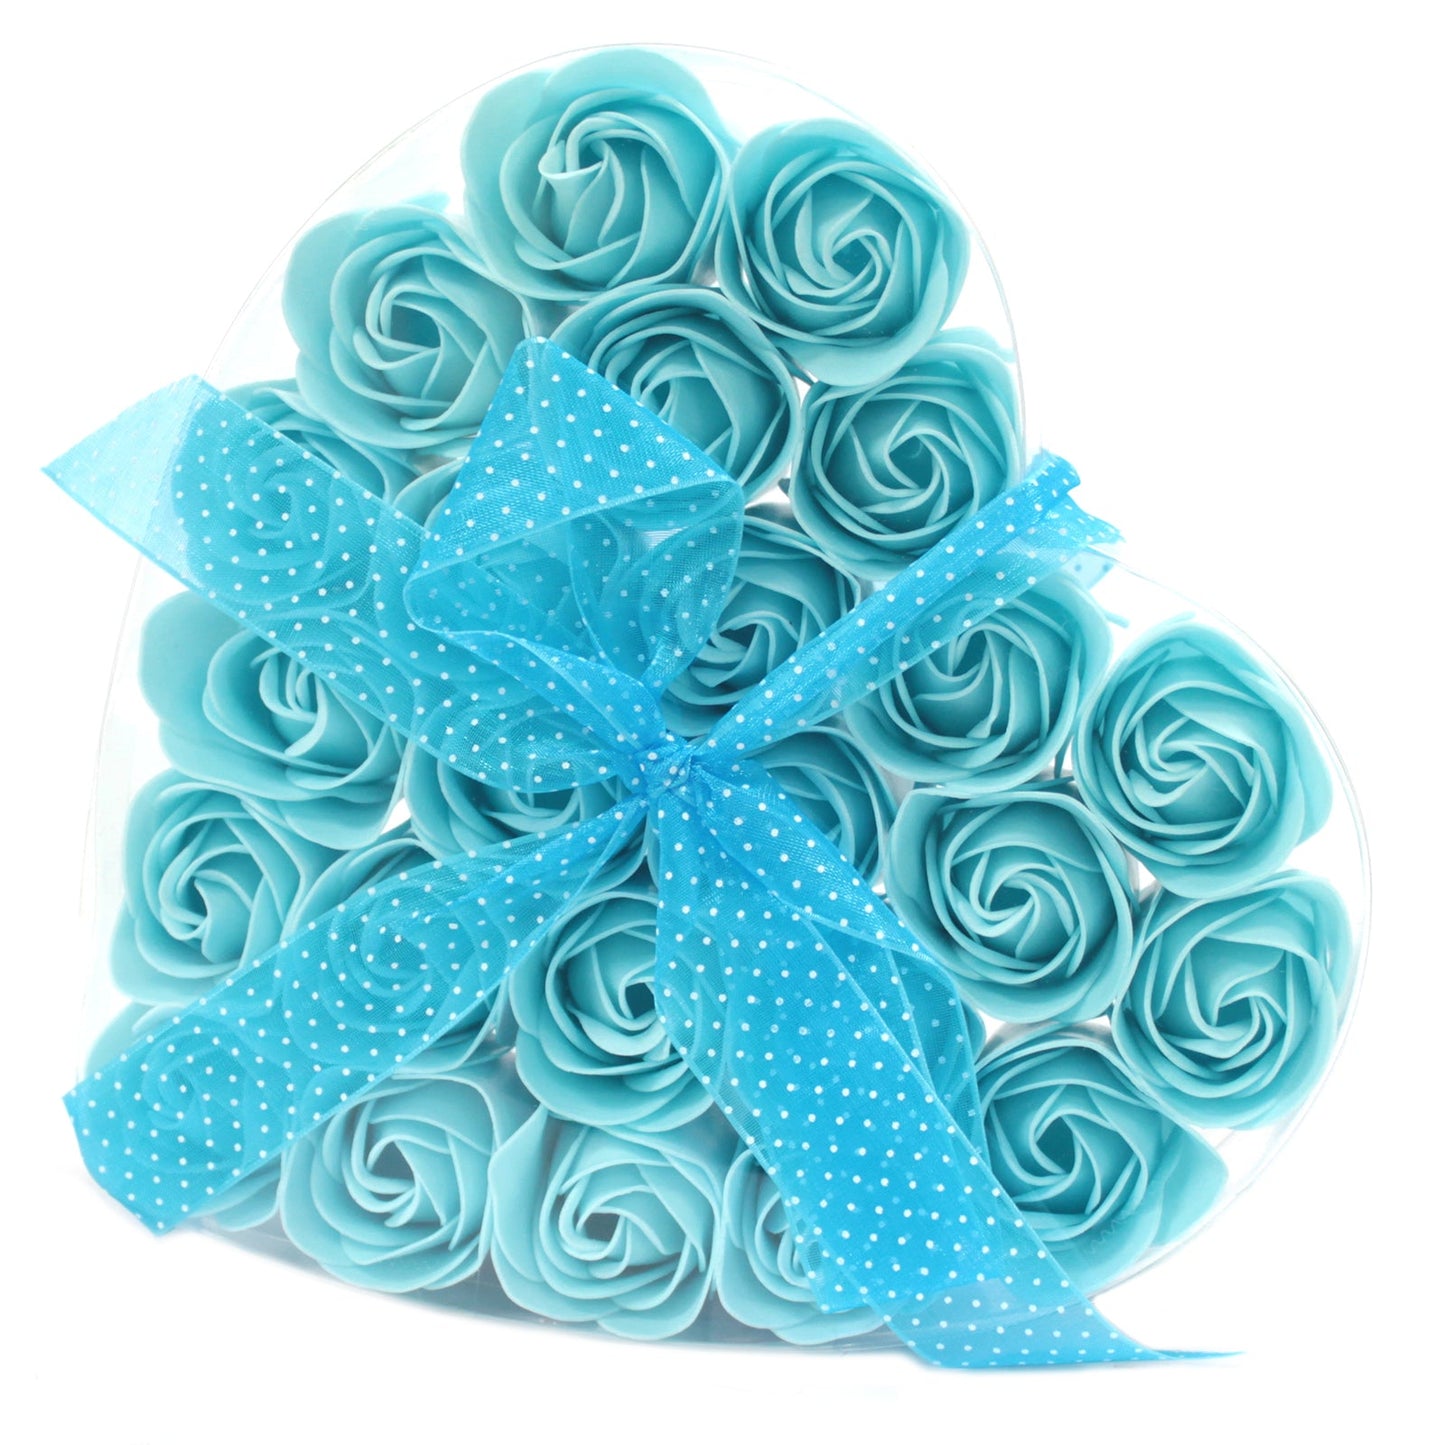 Set of 24 Soap Roses in Heart Box Soap Flowers Soul Inspired Blue 